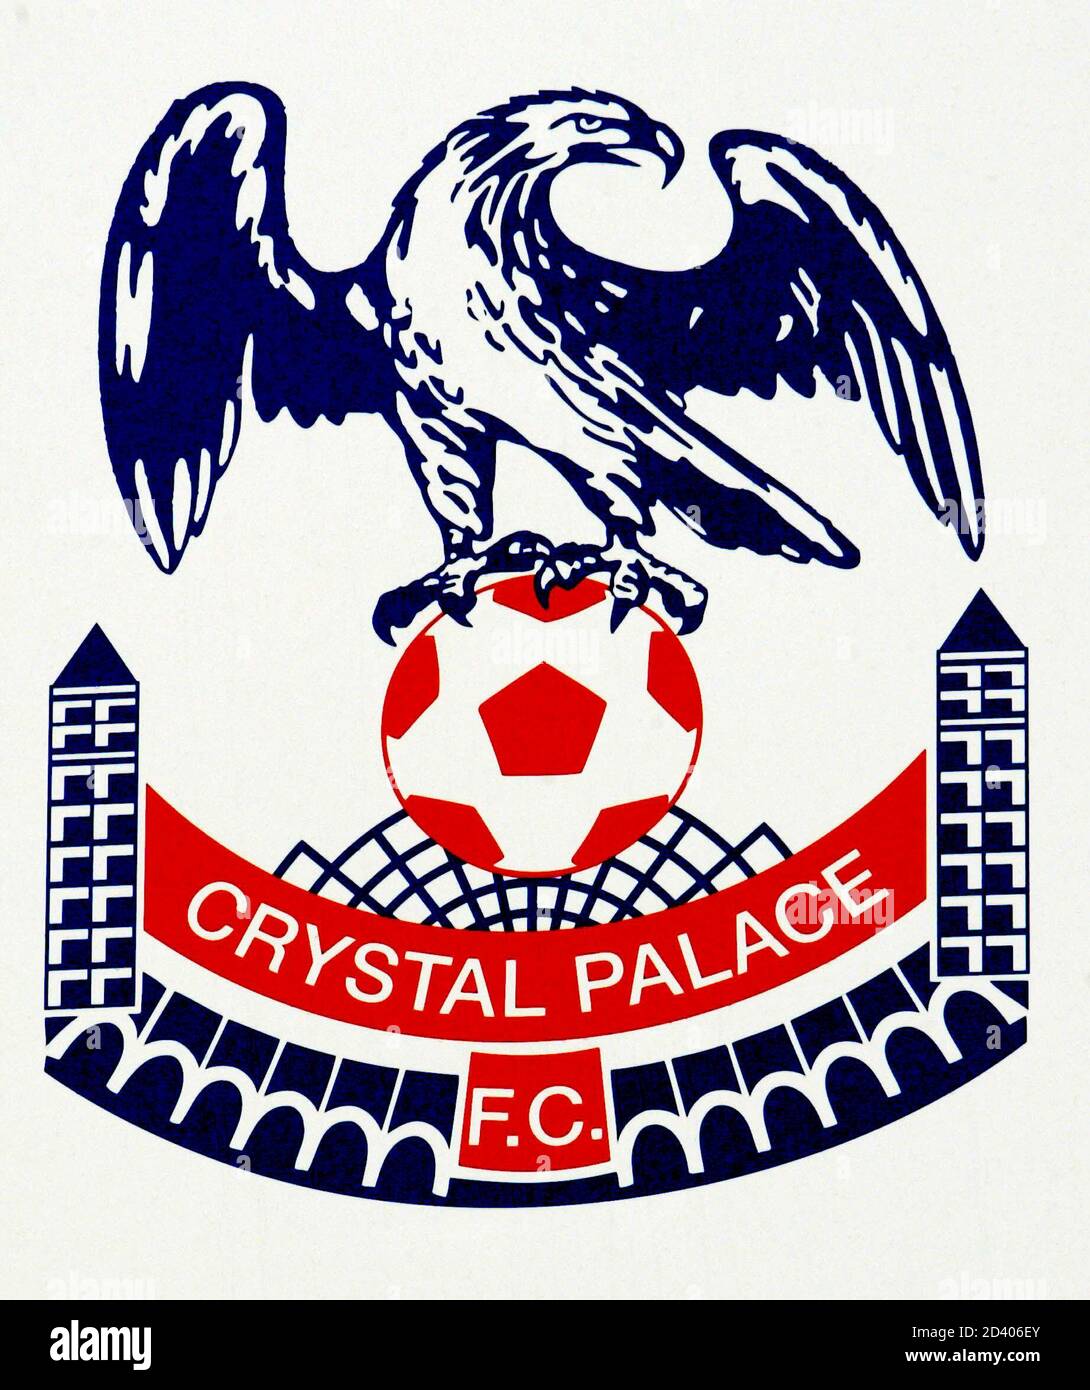 The logo of English soccer club Crystal Palace is seen outside Selhurst  Park stadium in south London, July 17, 2004. [Britain's Guardian newspaper  reported on Saturday that Libyan leader Muammar Gaddafi, who